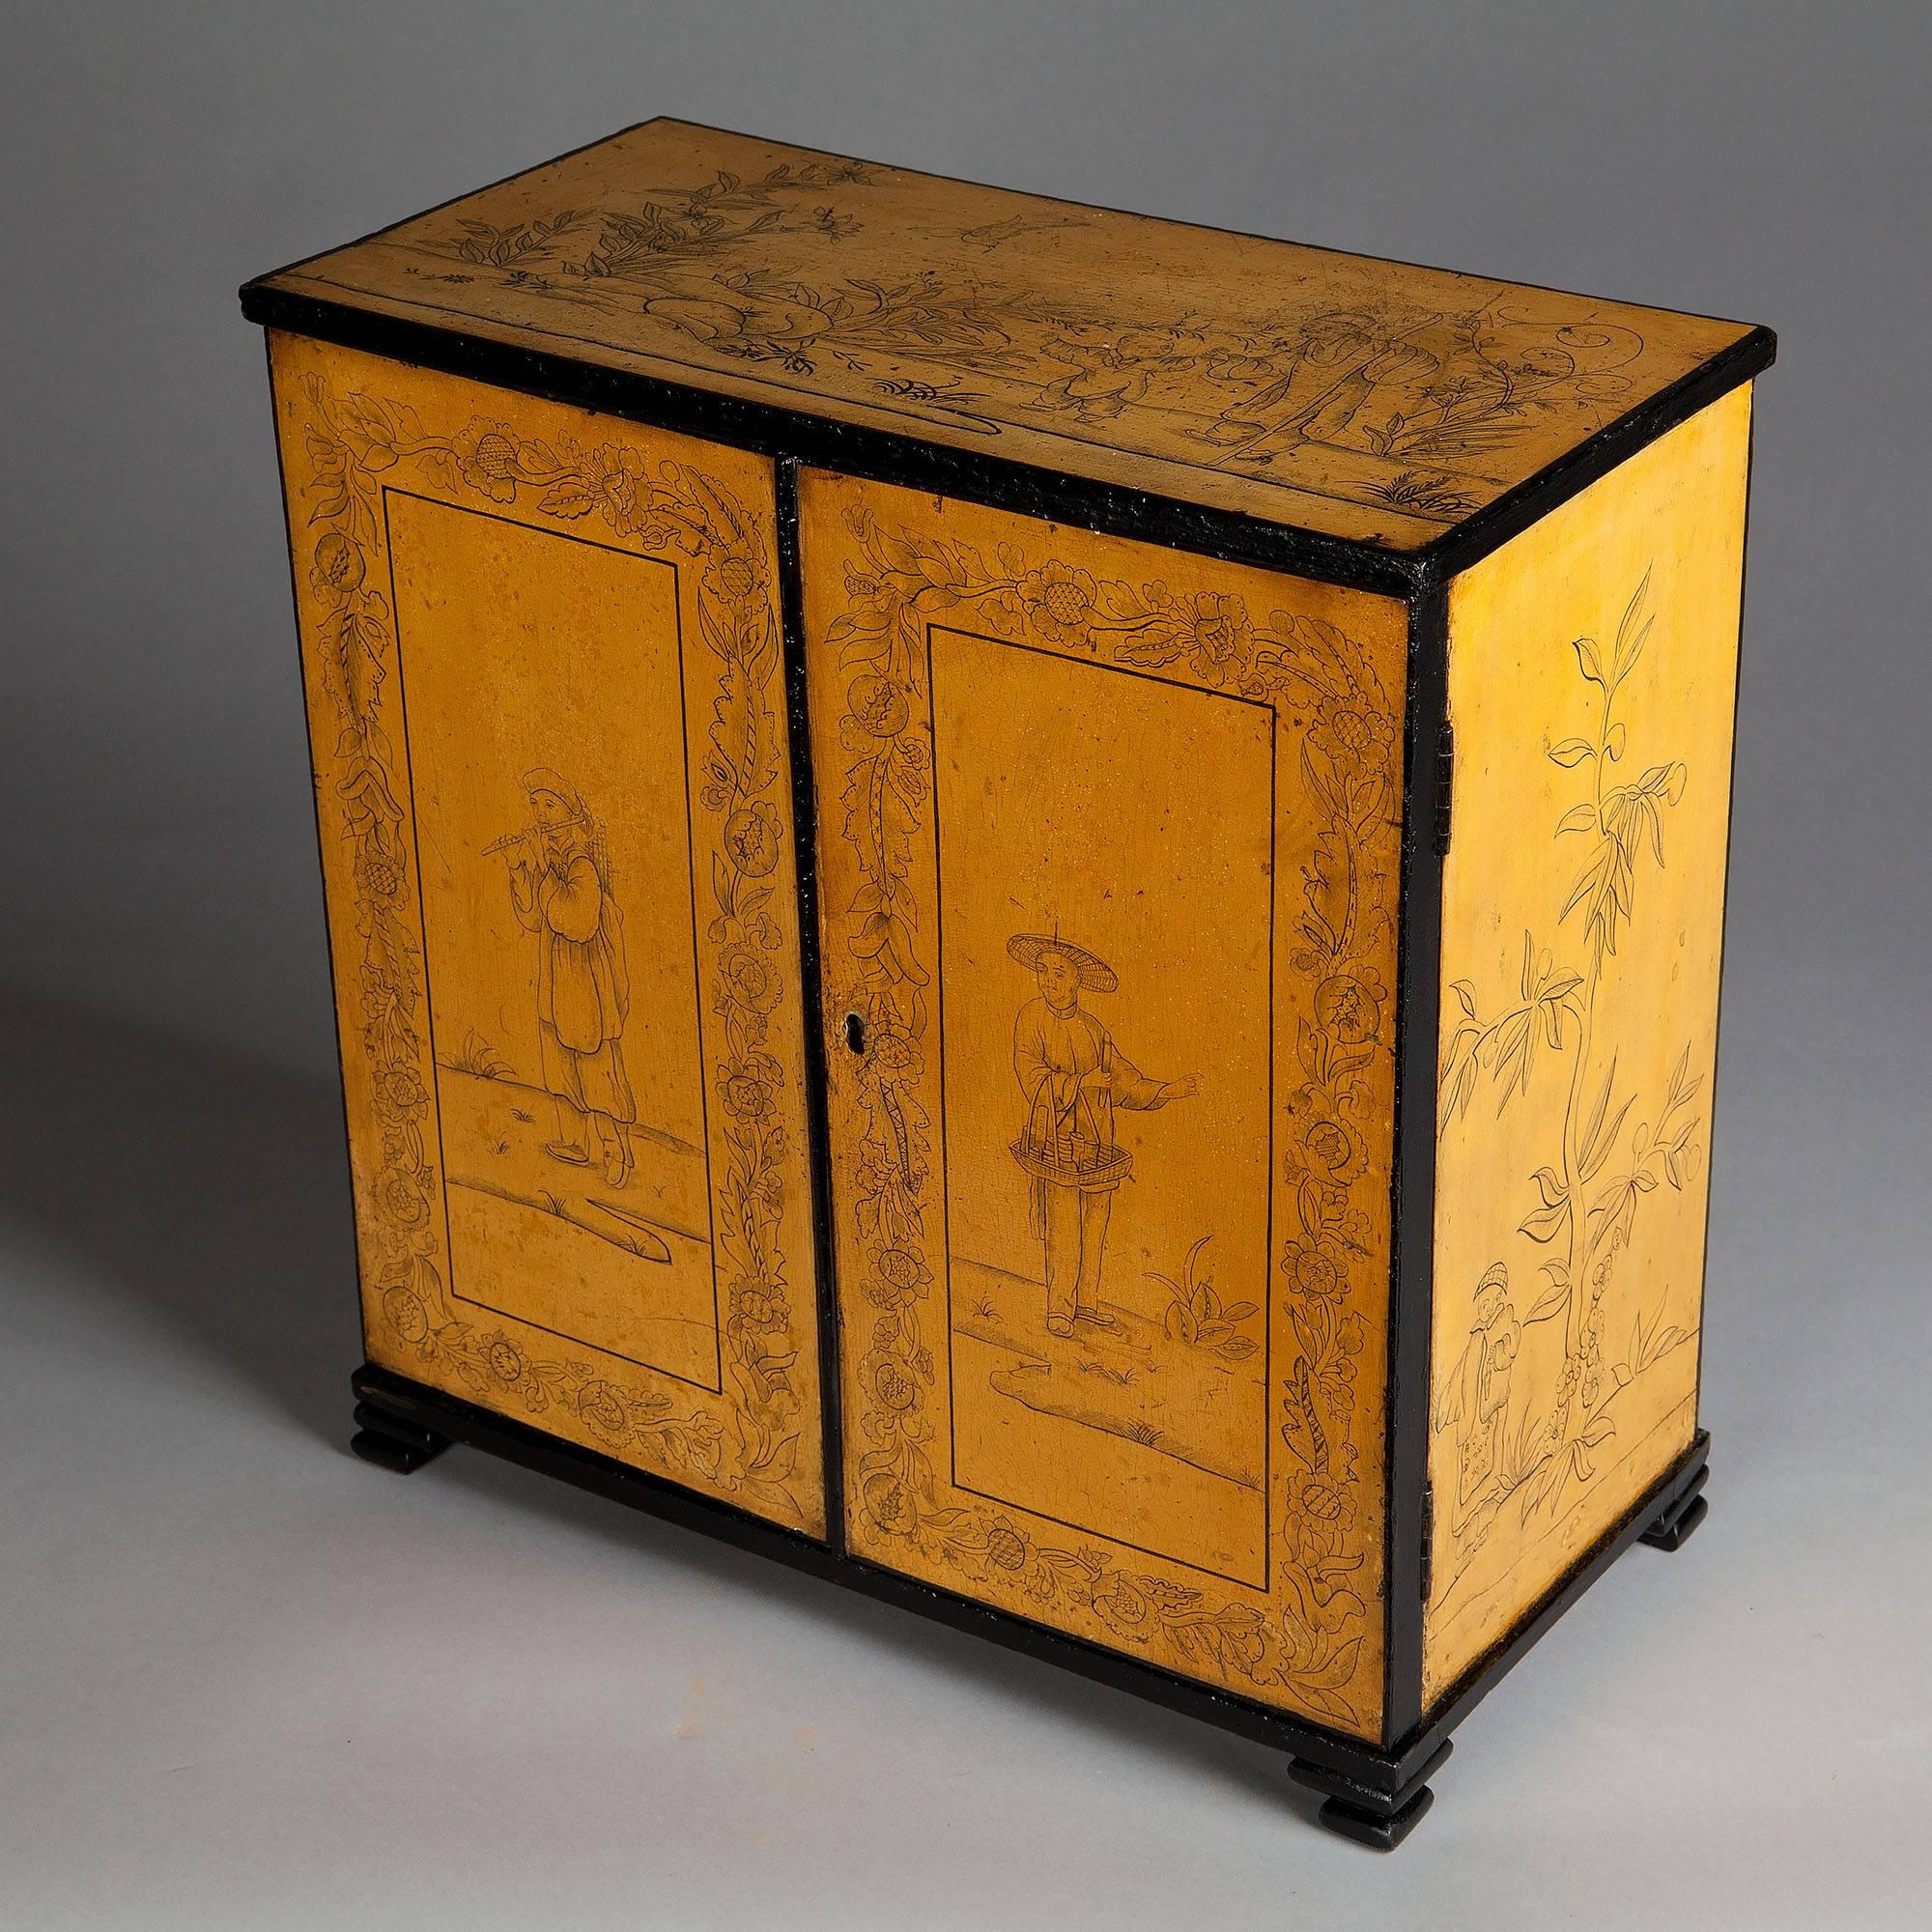 A fine early 19th century yellow lacquer cabinet decorated on all sides with penwork chinoiseries, the double doors opening to a fitted interior with four pigeon holes and four drawers, each with a silver drop handle and backplate.

Measures: